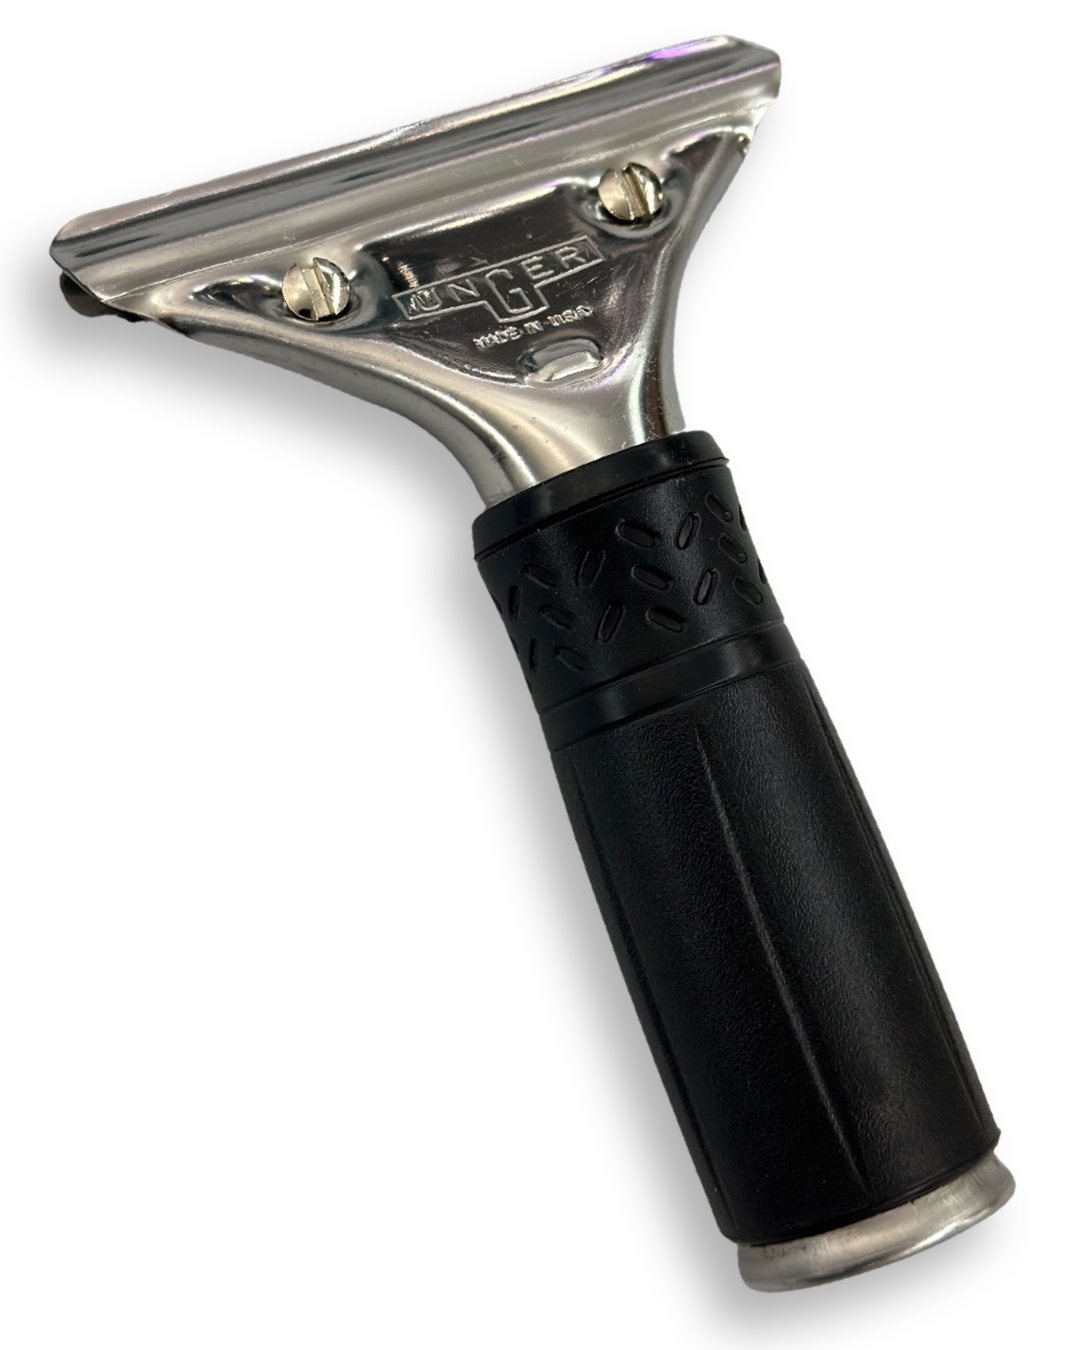 Unger Pro Stainless Steel Squeegee Handle